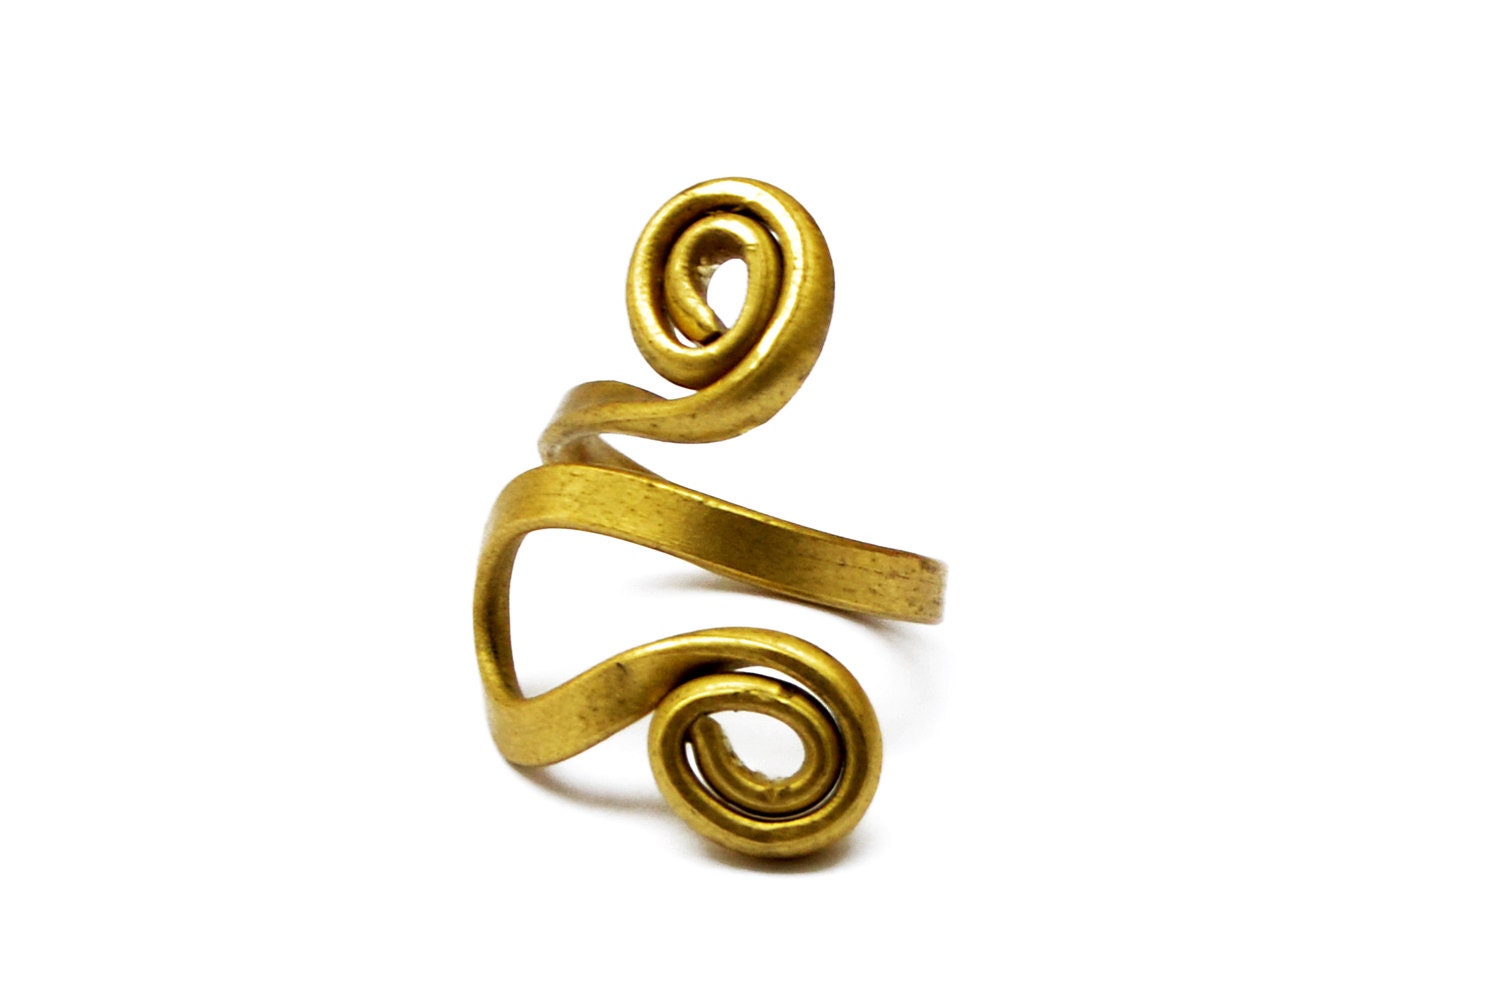 Gold Toe Ring Spiral Toe Ring Foot Ring Wire Toe Ring - Etsy